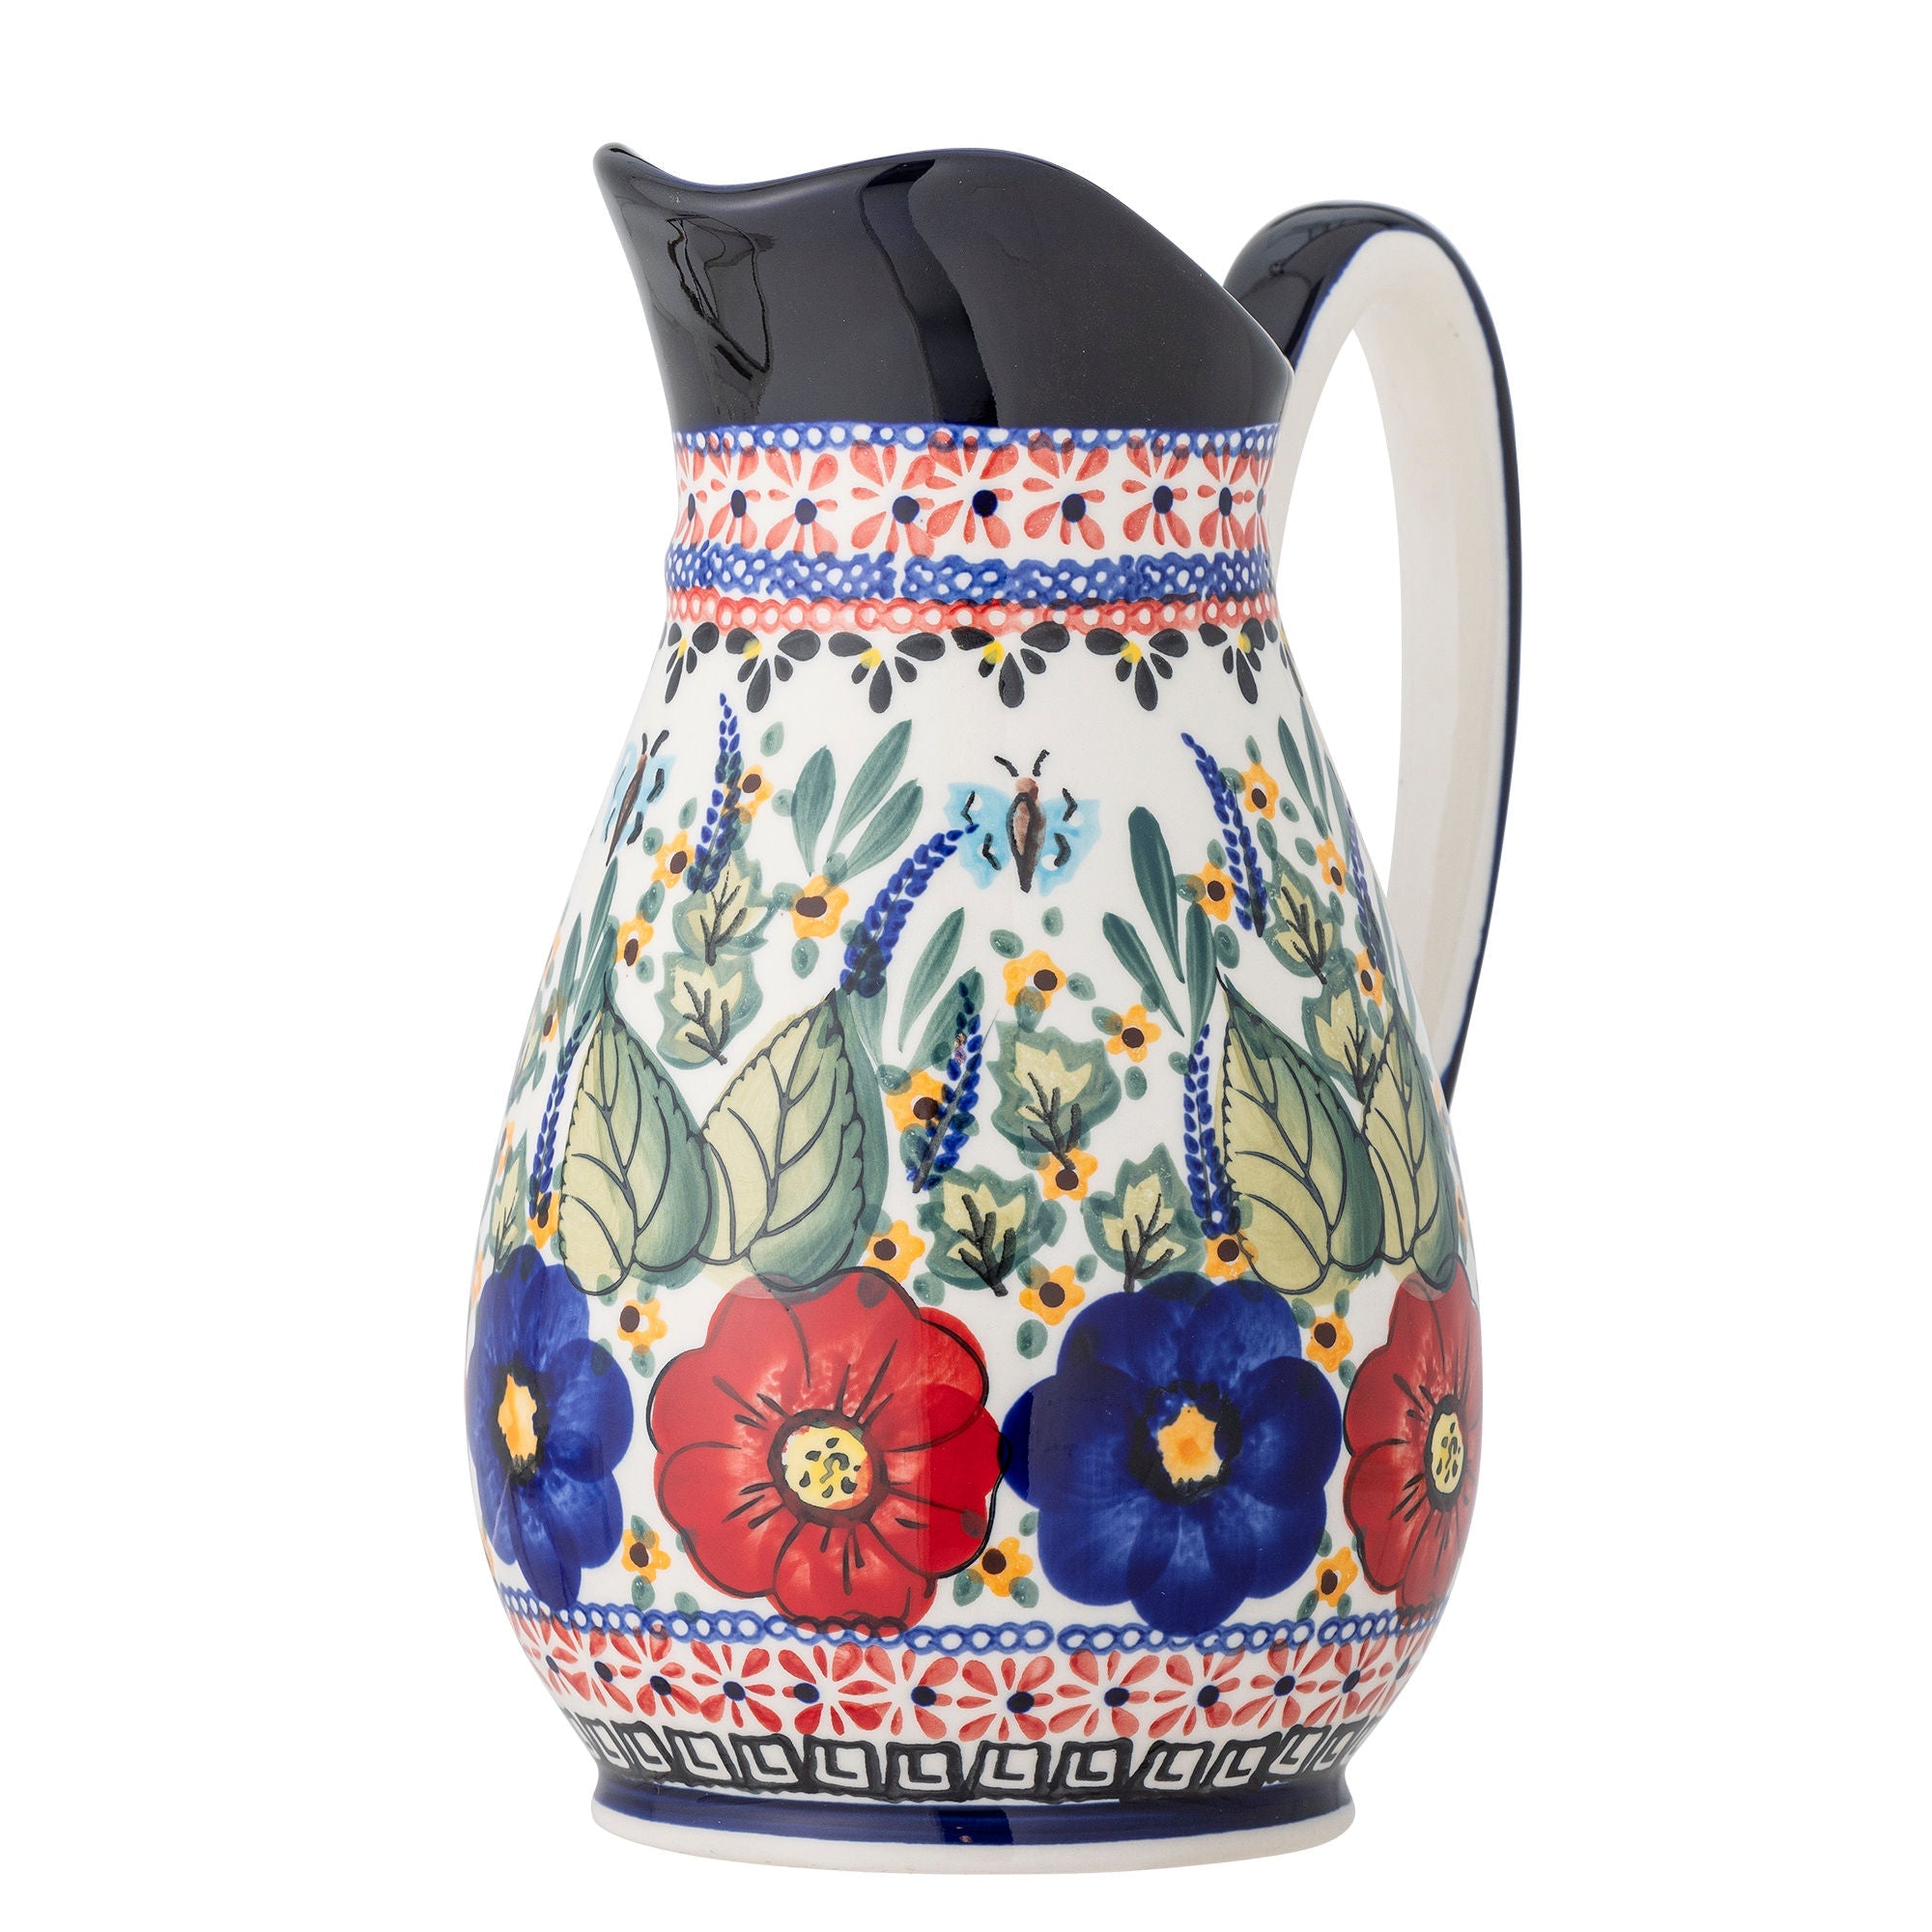 Creative Collection Florist Jug, Red, Stoneware